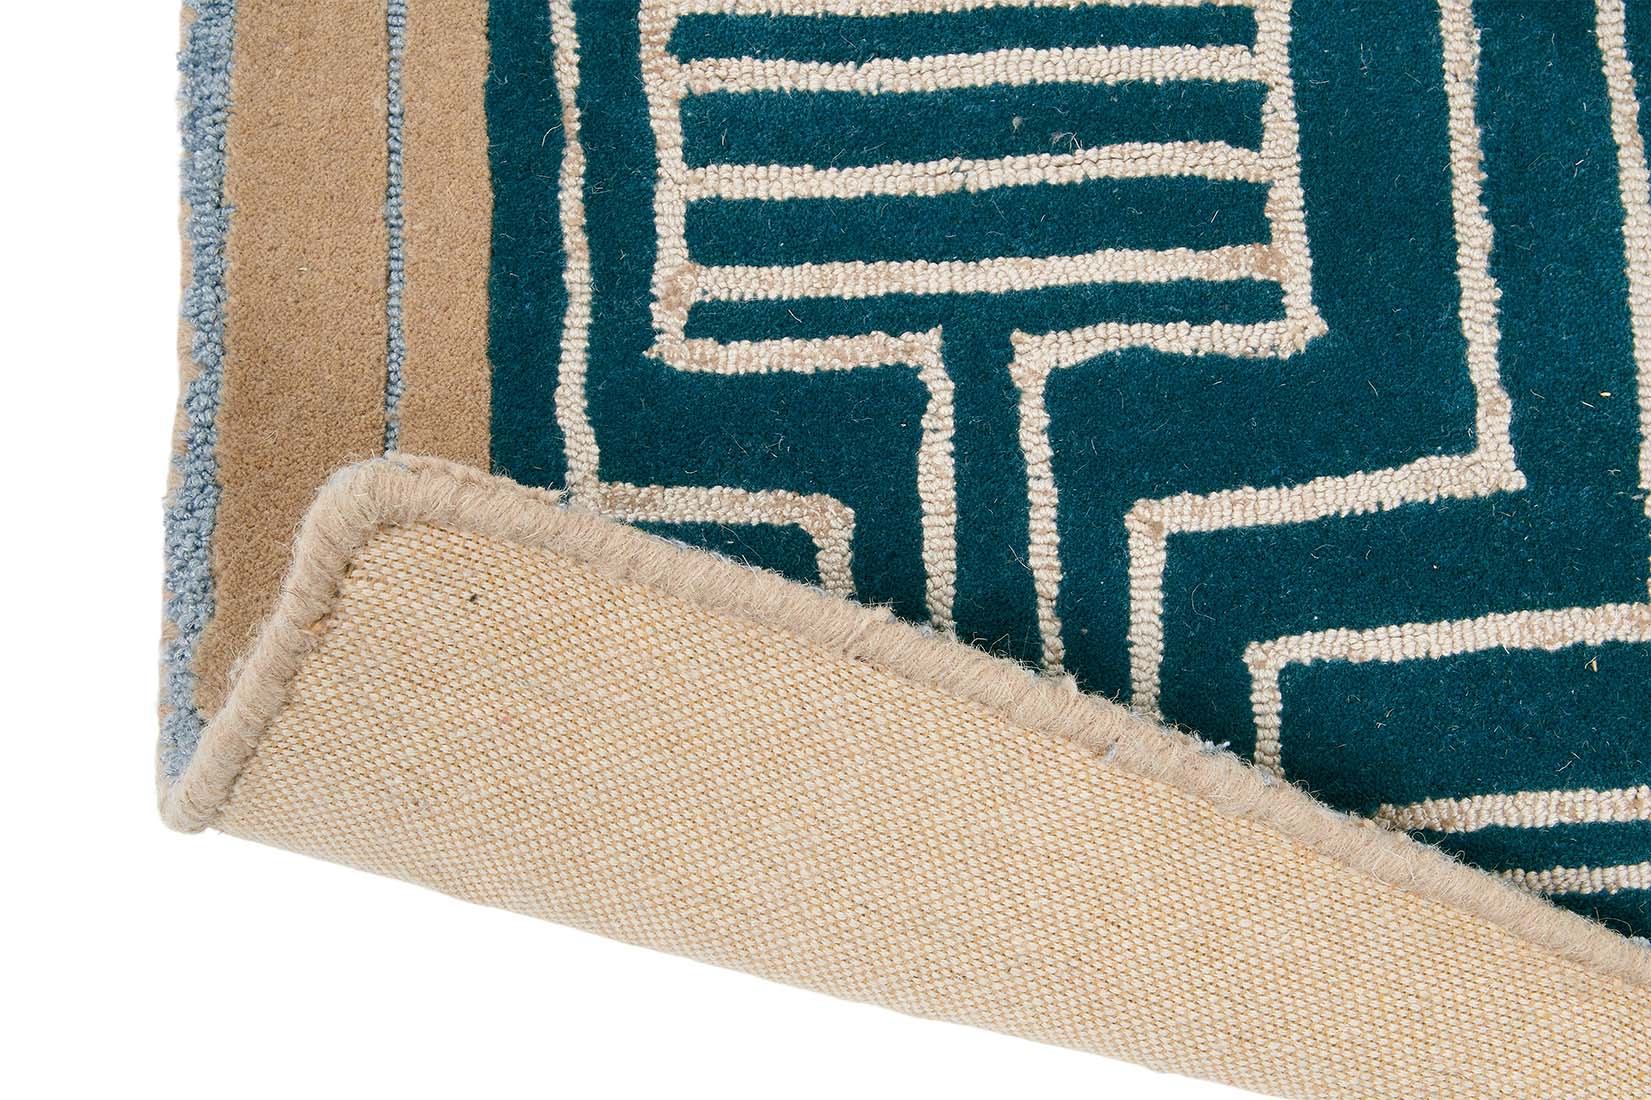 Rectangular green rug with beige border and grey art deco pattern